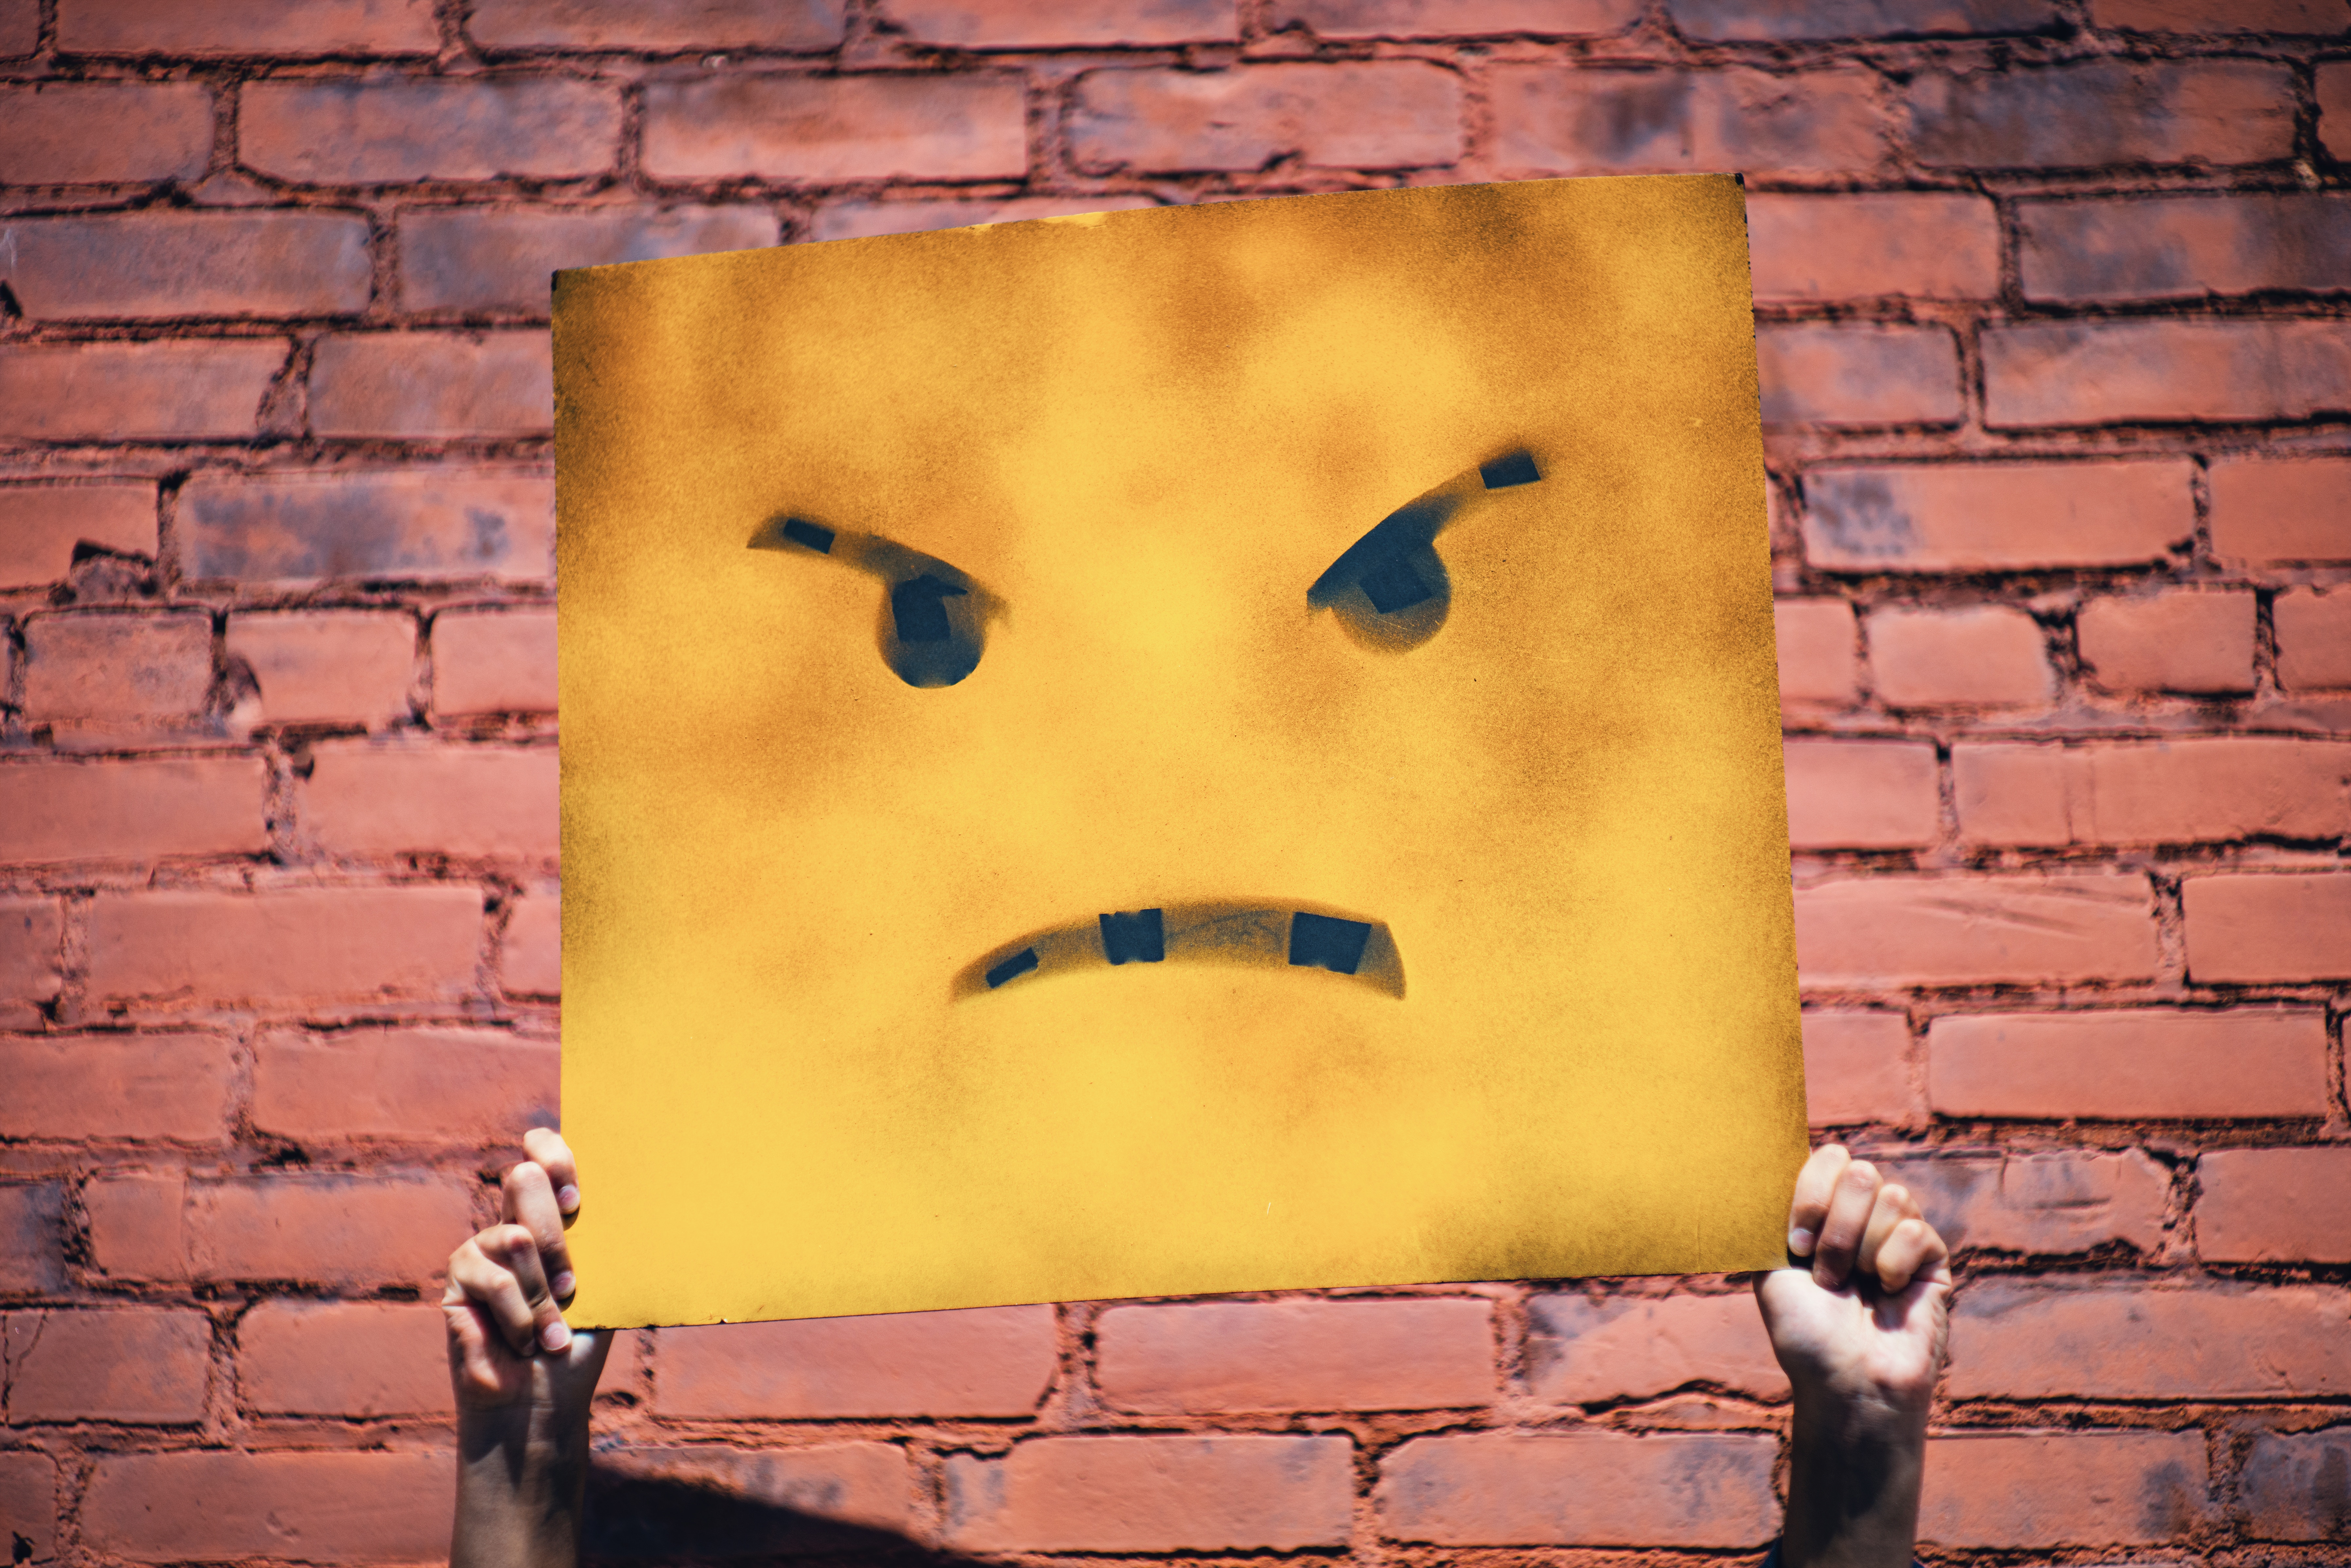 a picture of someone holding up a sign that has an angry or frustrated face on it